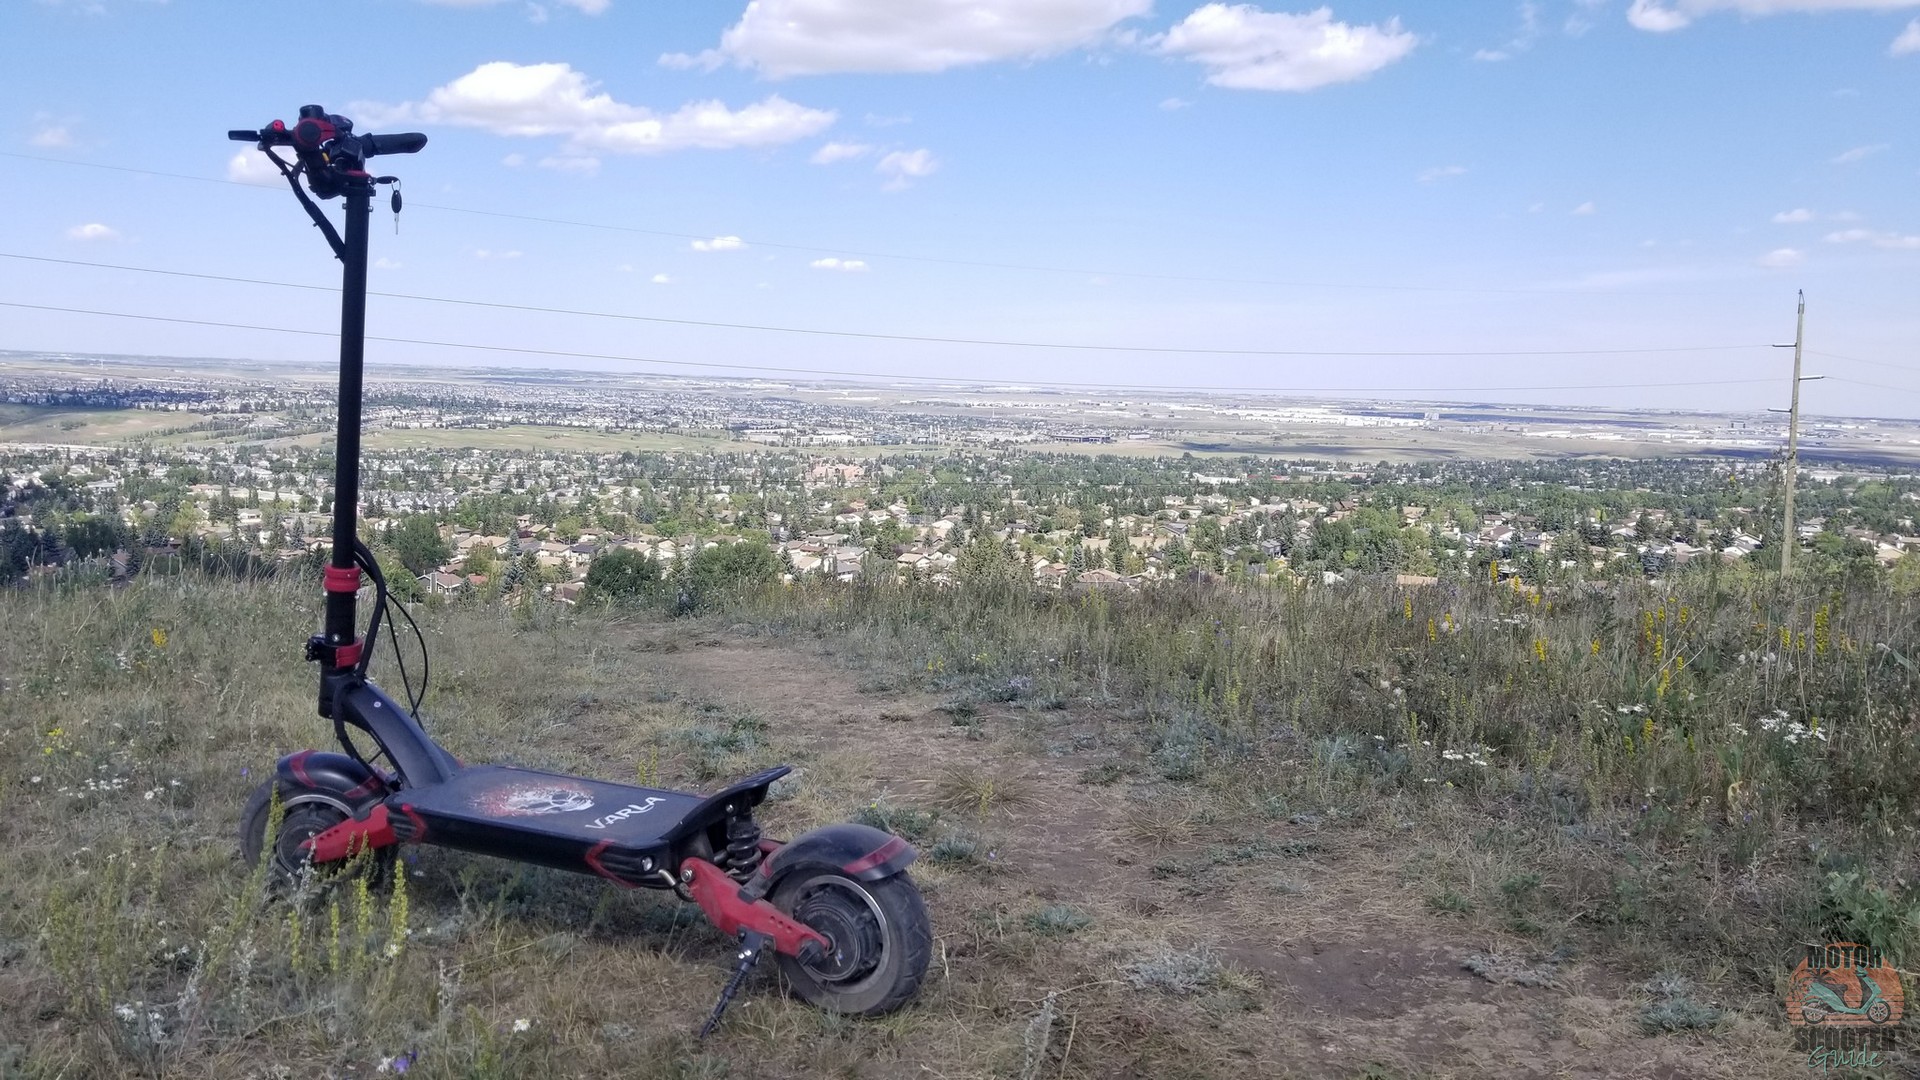 Eagle One scooter at the top of Nose Hill park overlooking the city